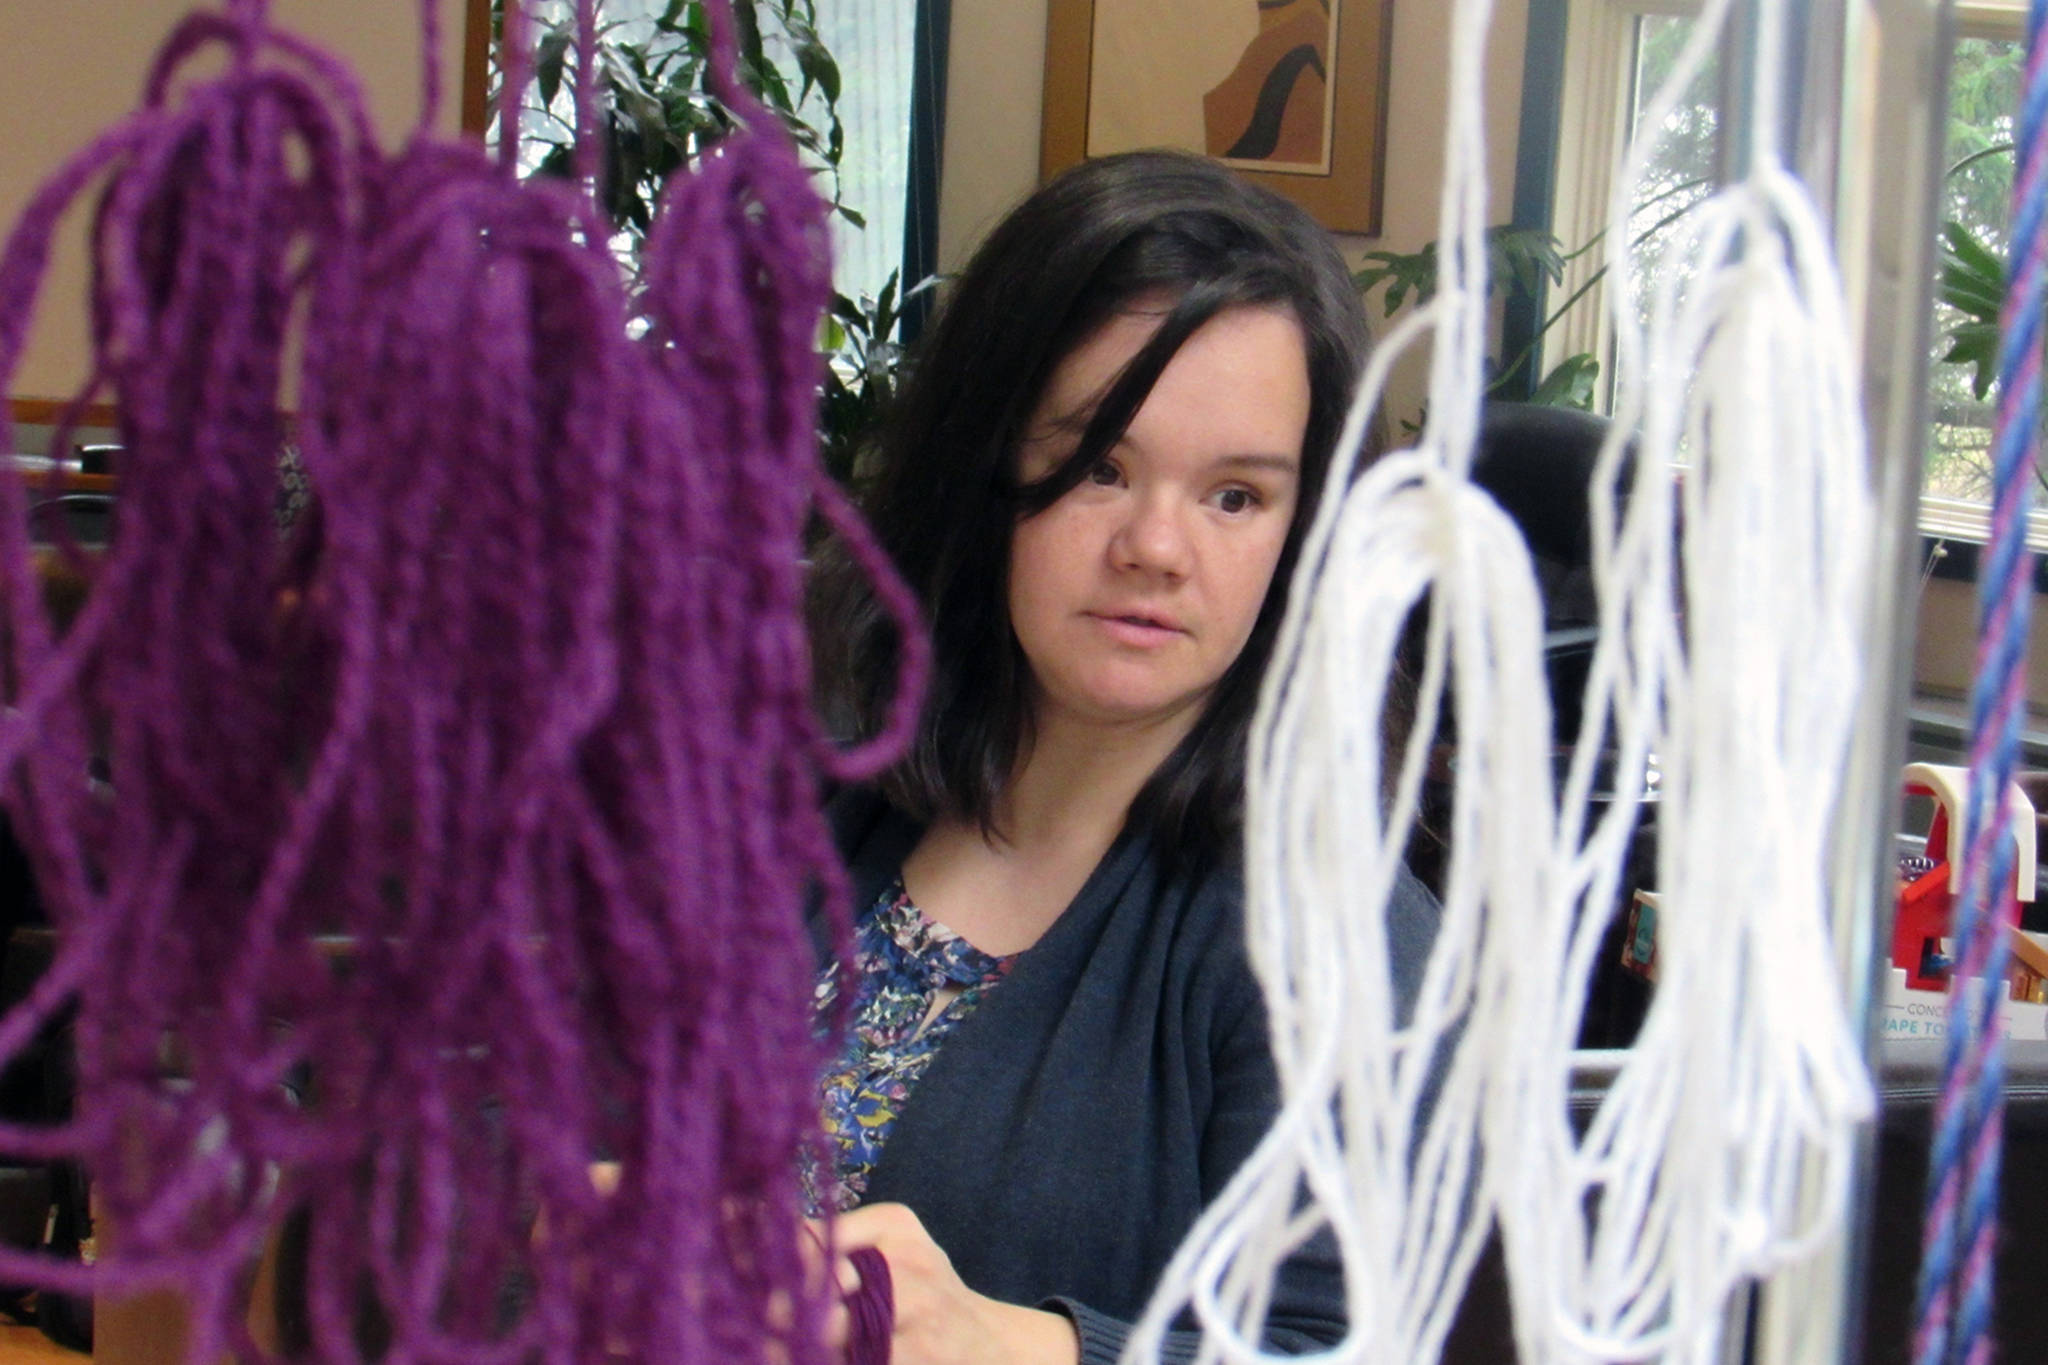 Weaver Lily Hope peers through materials while discussing the Giving Strength Robe project, a collaborative effort meant to honor survivors of violence, Friday, April 12, 2019. (Ben Hohenstatt | Juneau Empire)